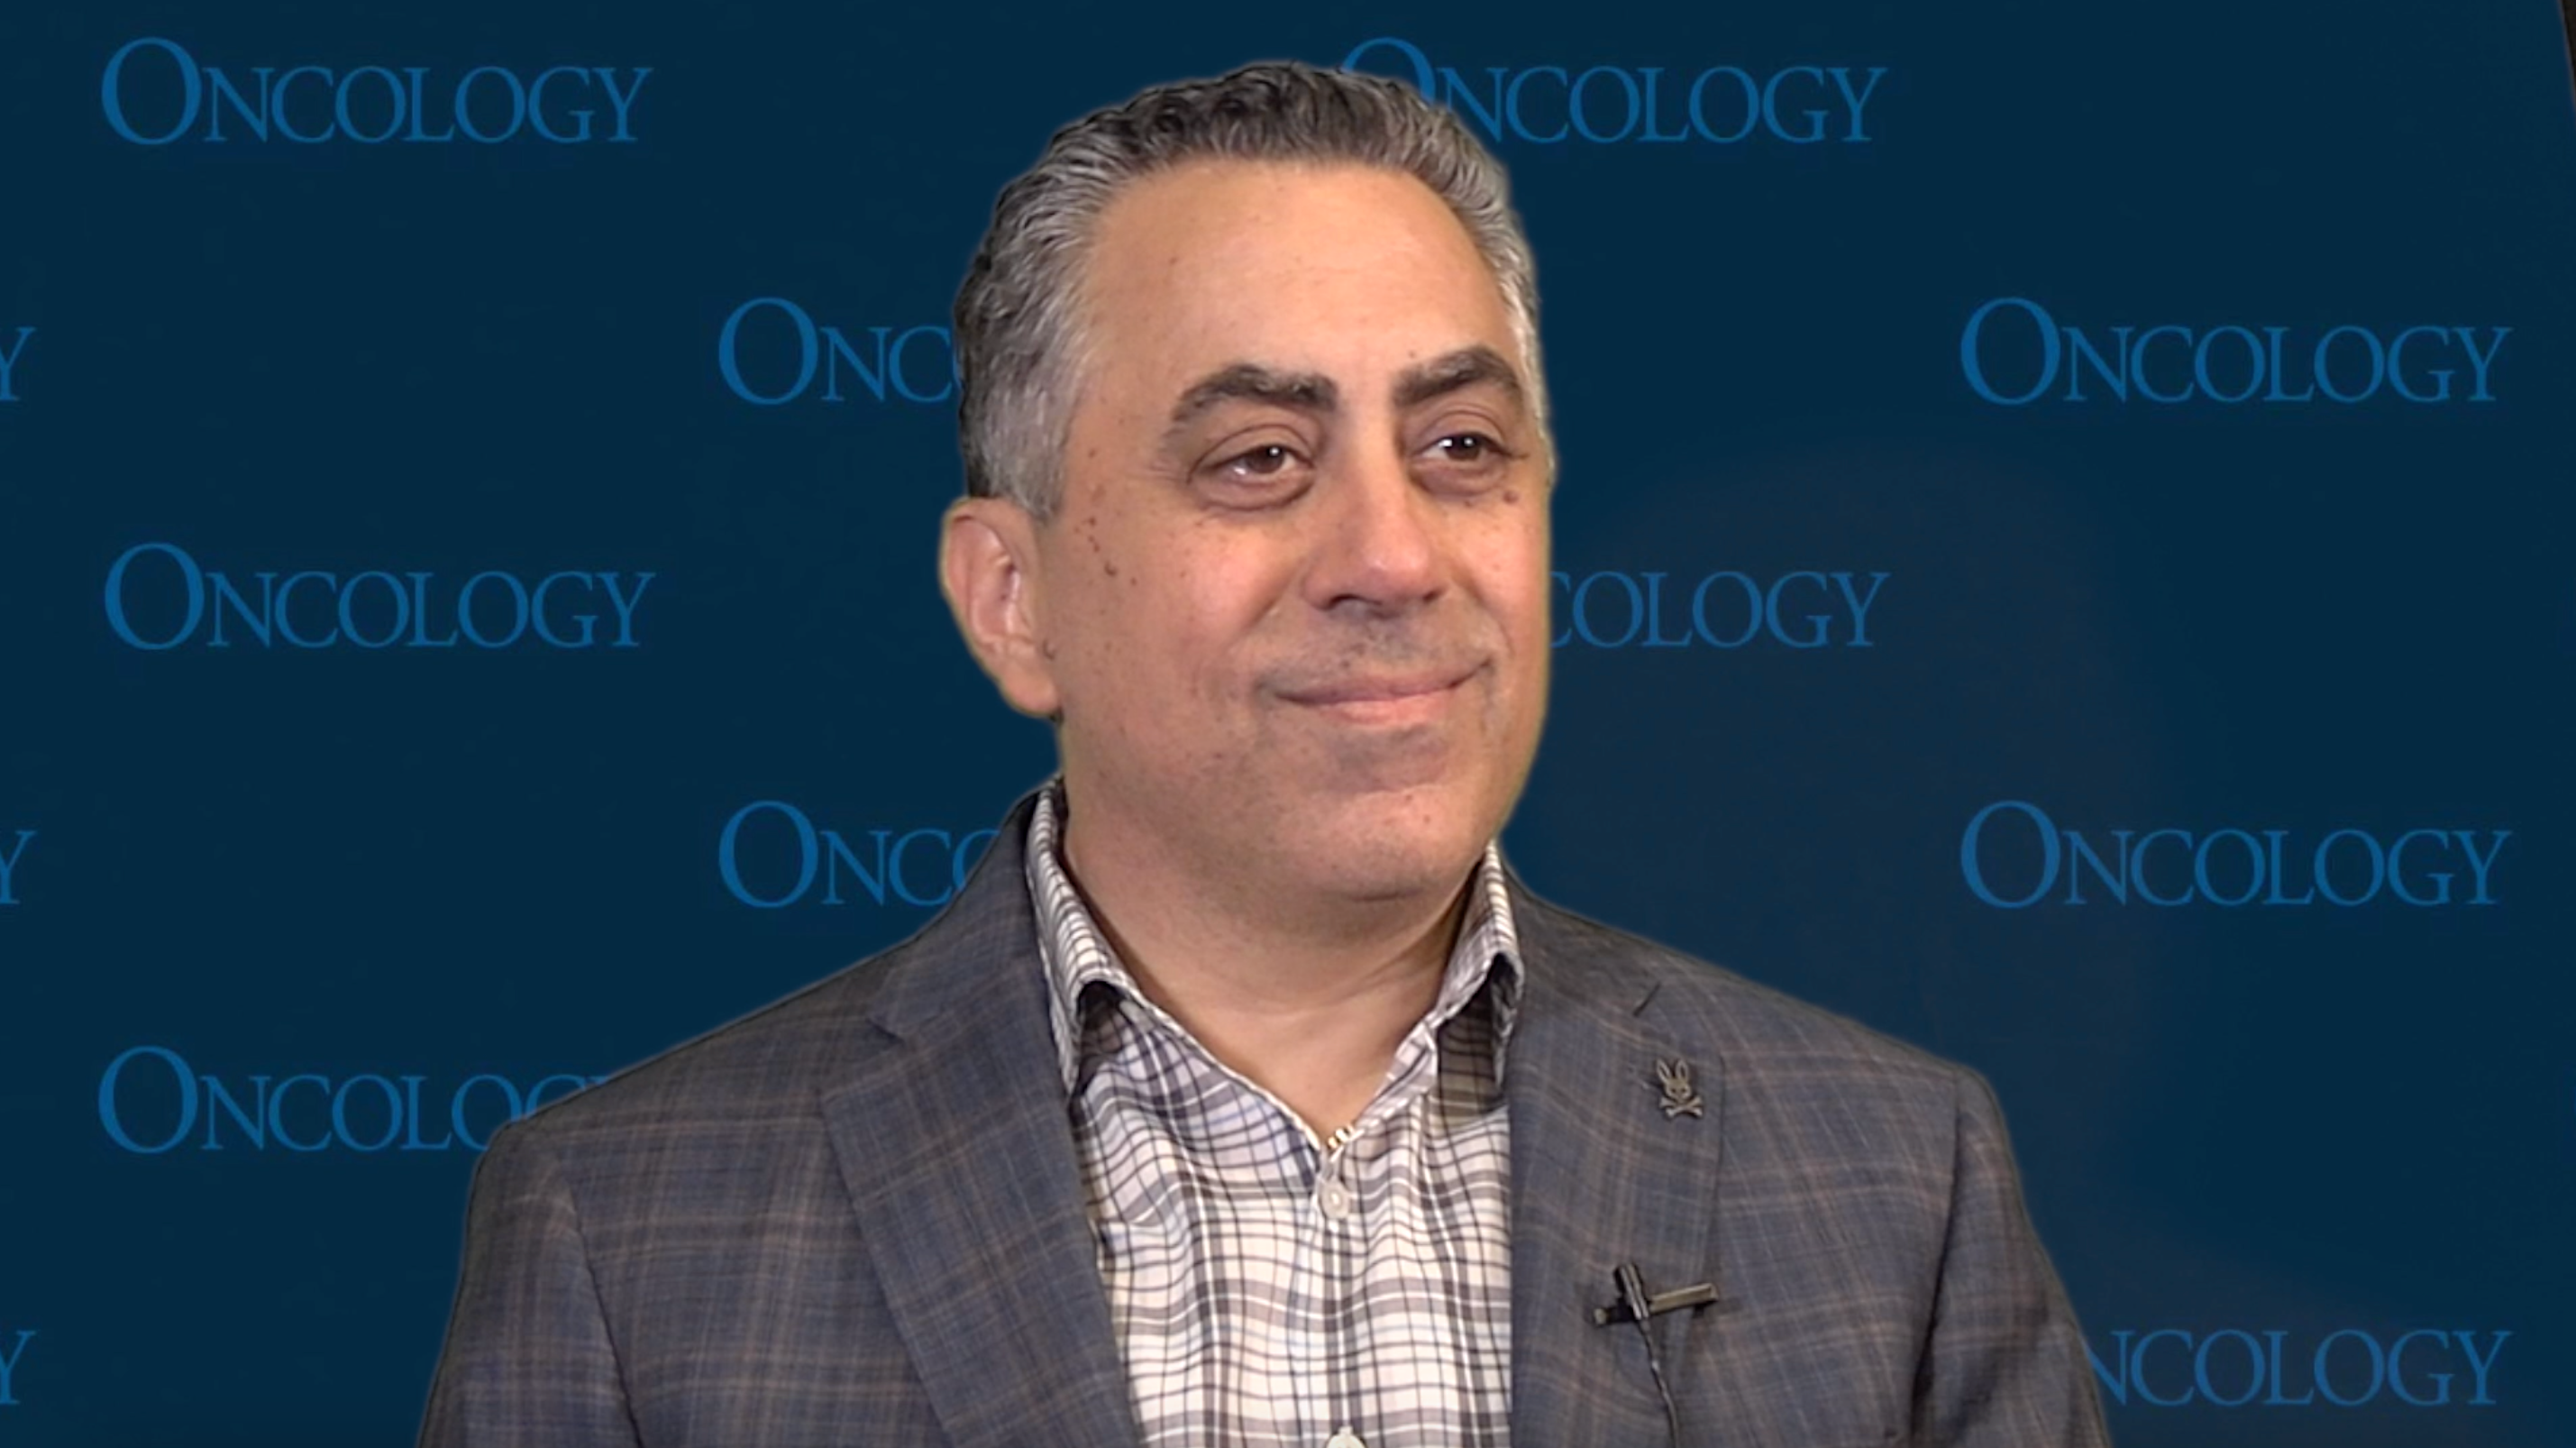 Tanios S. Bekaii-Saab, MD, Forecasts Treatment Landscape of CRC as More Targeted Regimens Become Available  